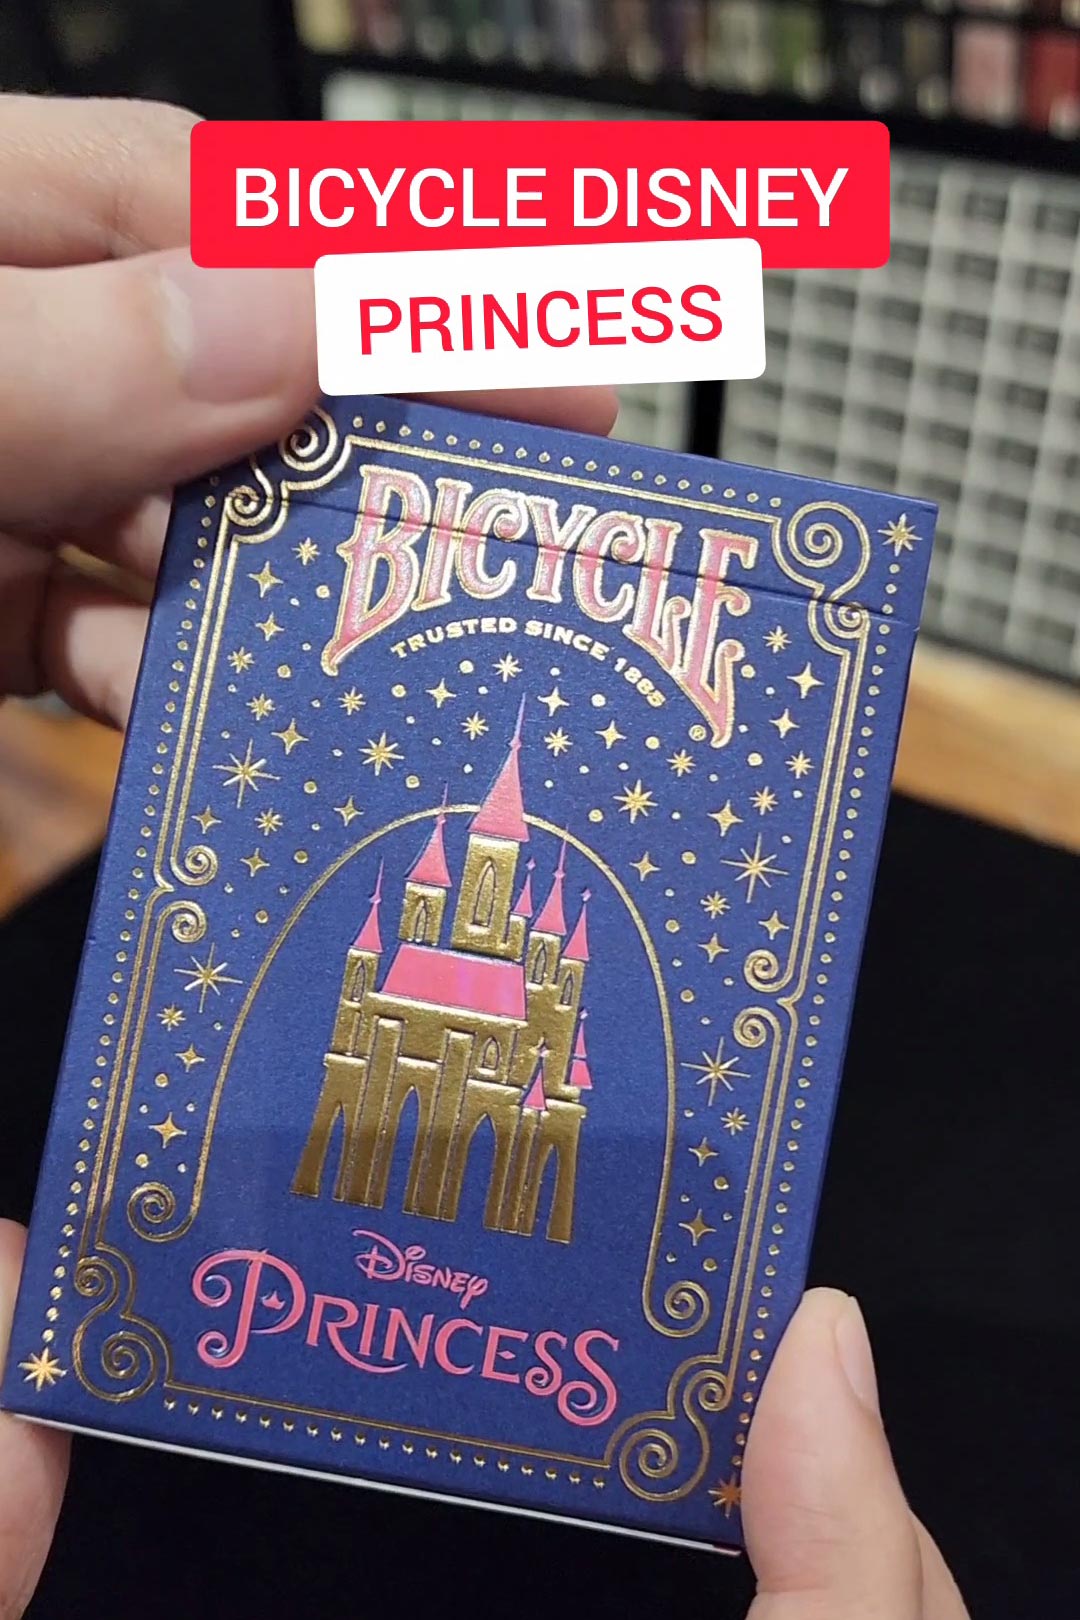 Bicycle Disney Princess Playing Cards Unboxing!